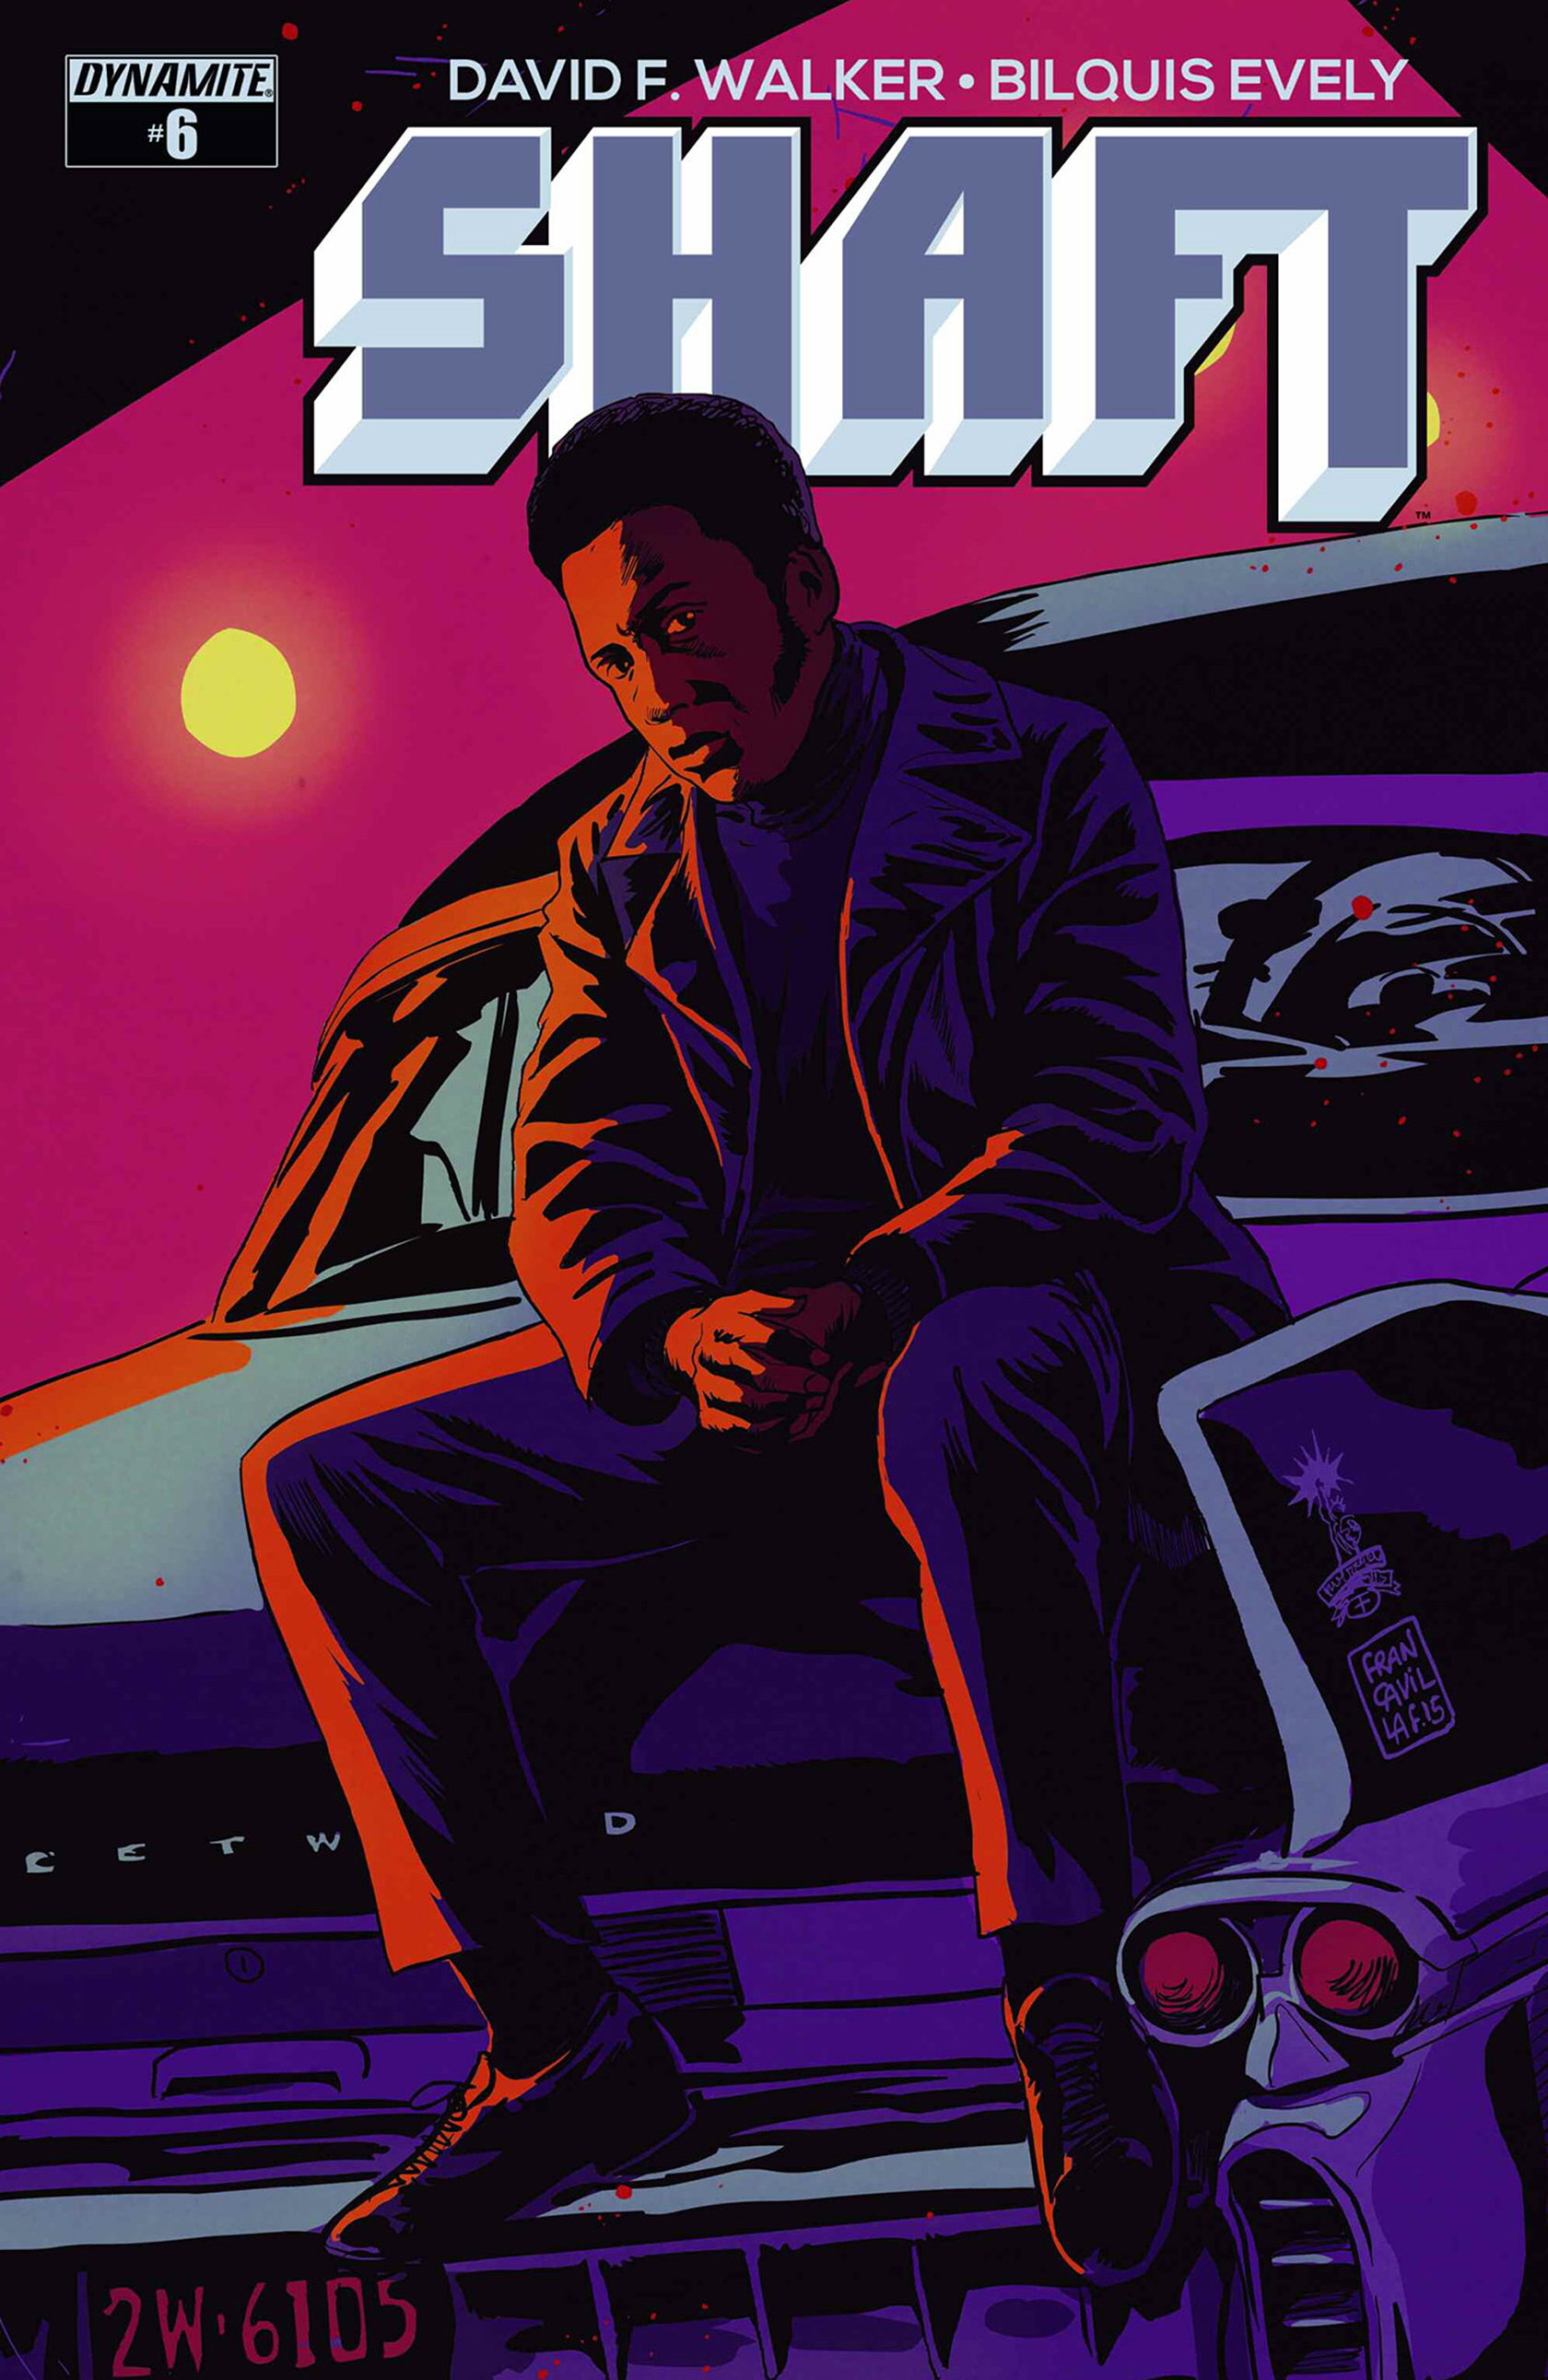 Read online Shaft comic -  Issue #6 - 2